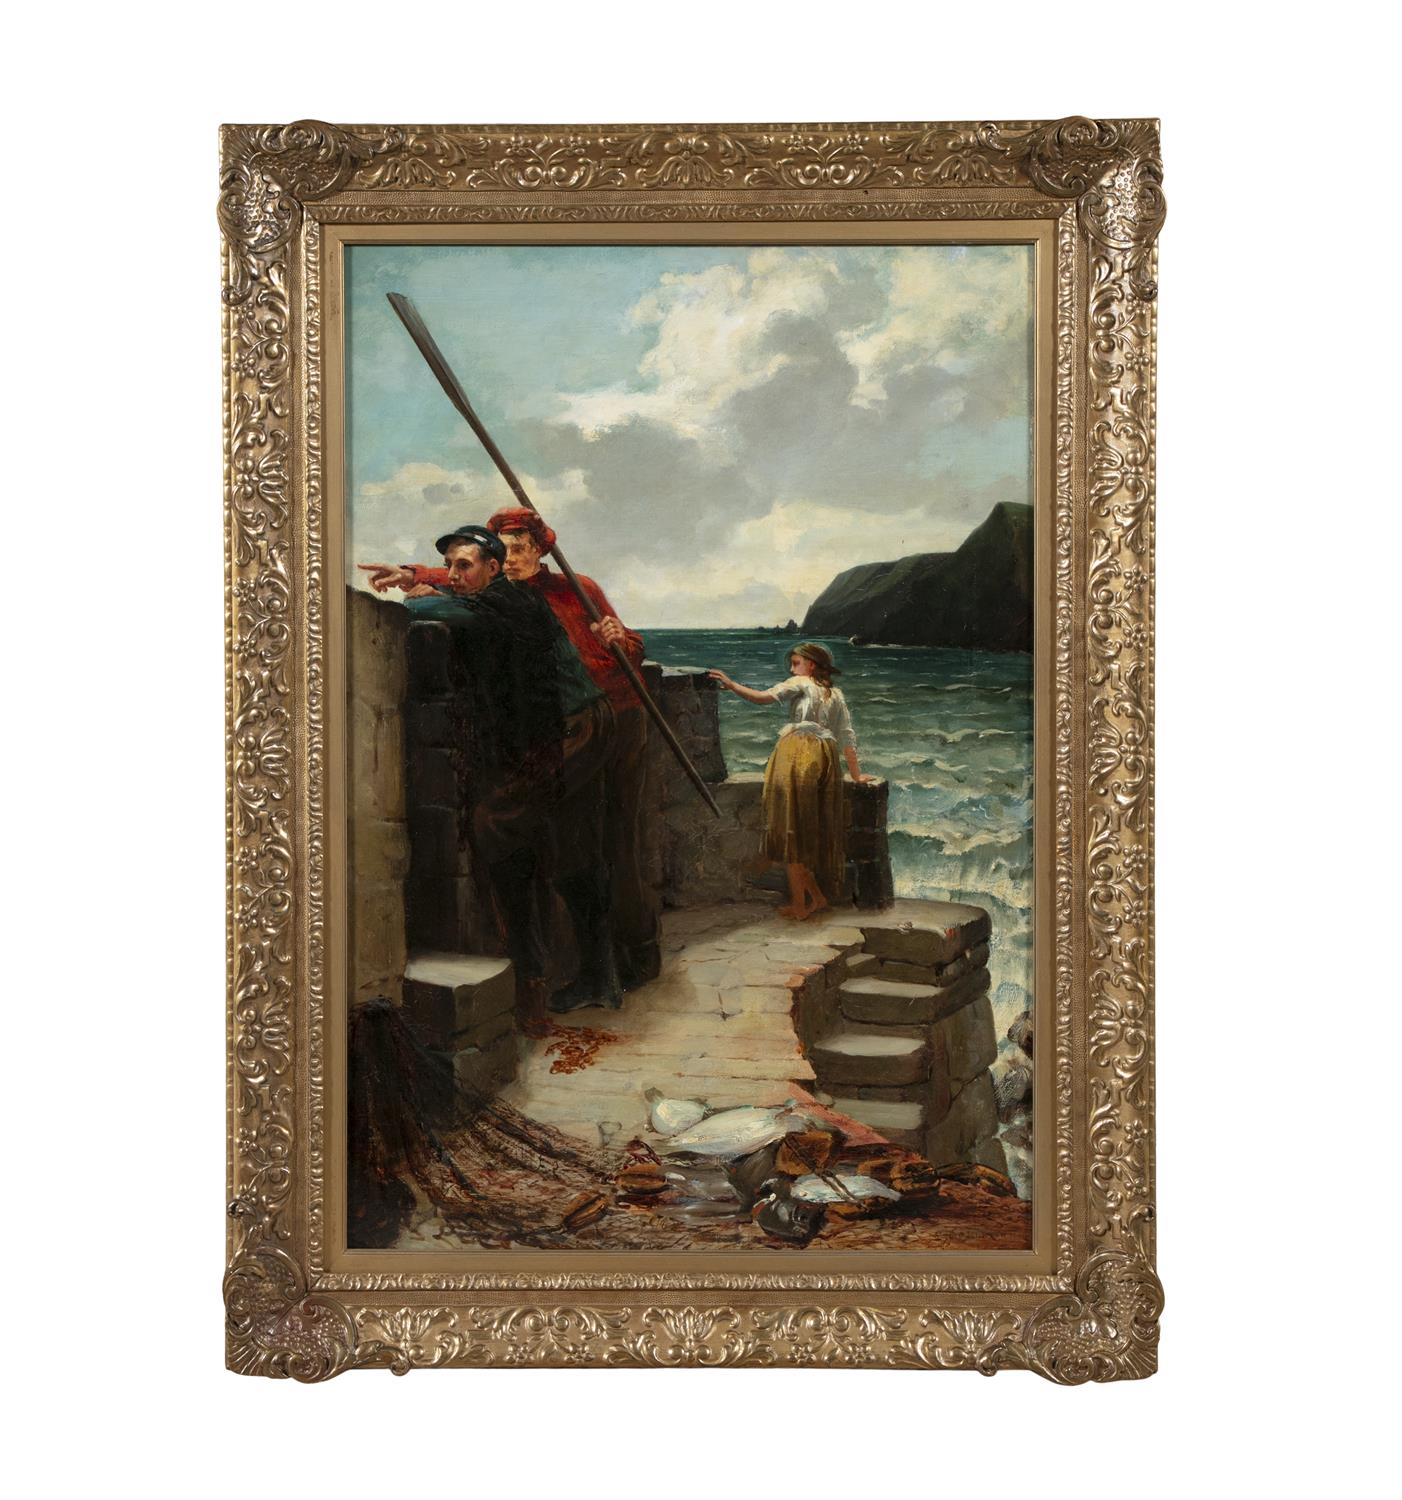 COLIN HUNTER A.R.A (1841-1904) 'A Strange Craft' (1891) Oil on canvas, 76 x 51cm Signed and